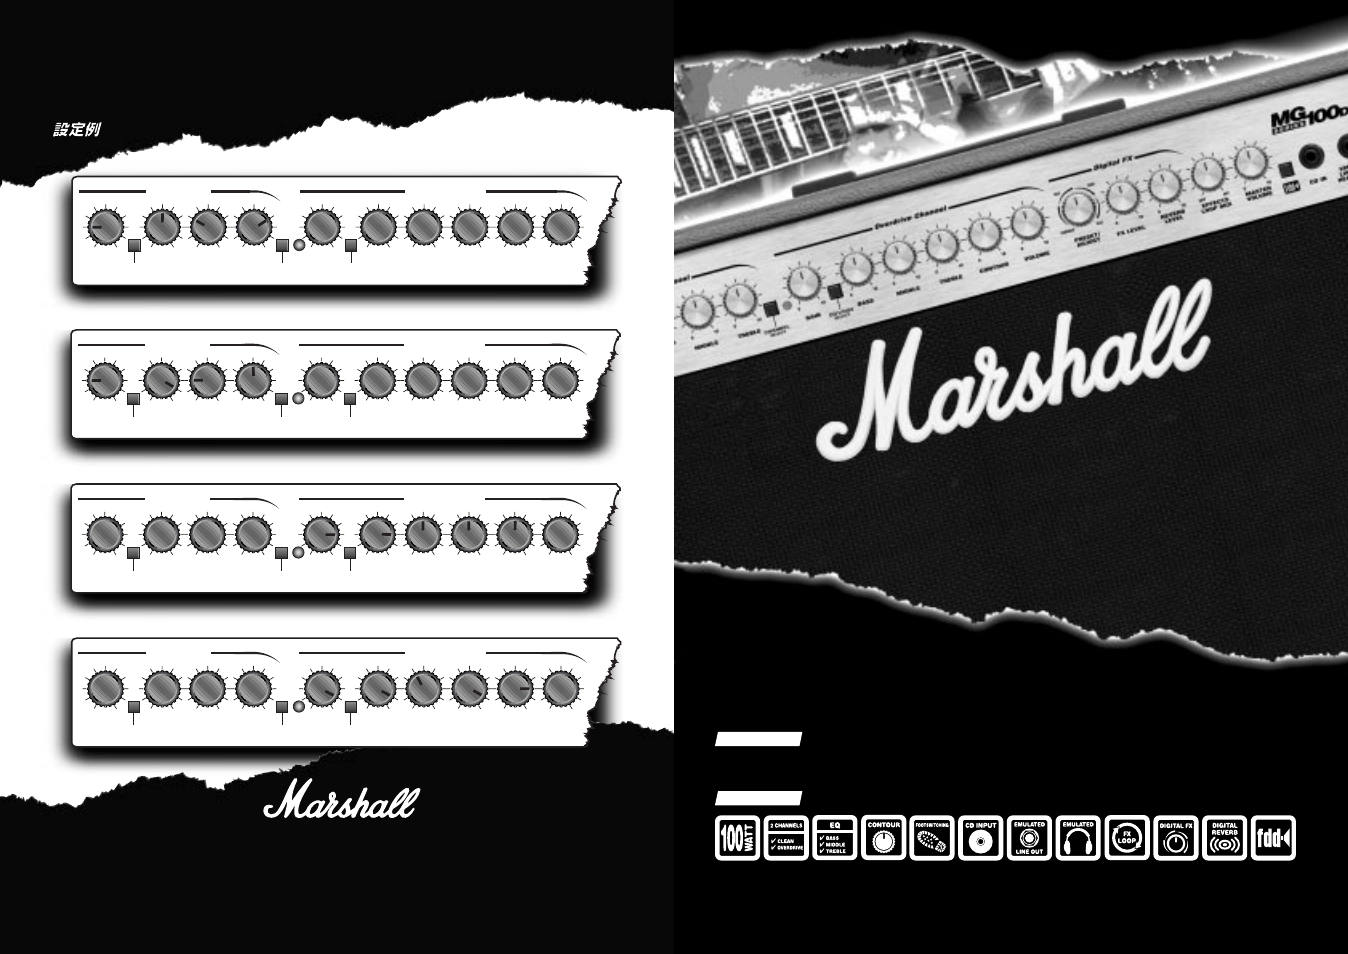 Suggested settings, Owners manual, Hdfx | Marshall Amplification MG100DFX User  Manual | Page 6 / 6 | Original mode